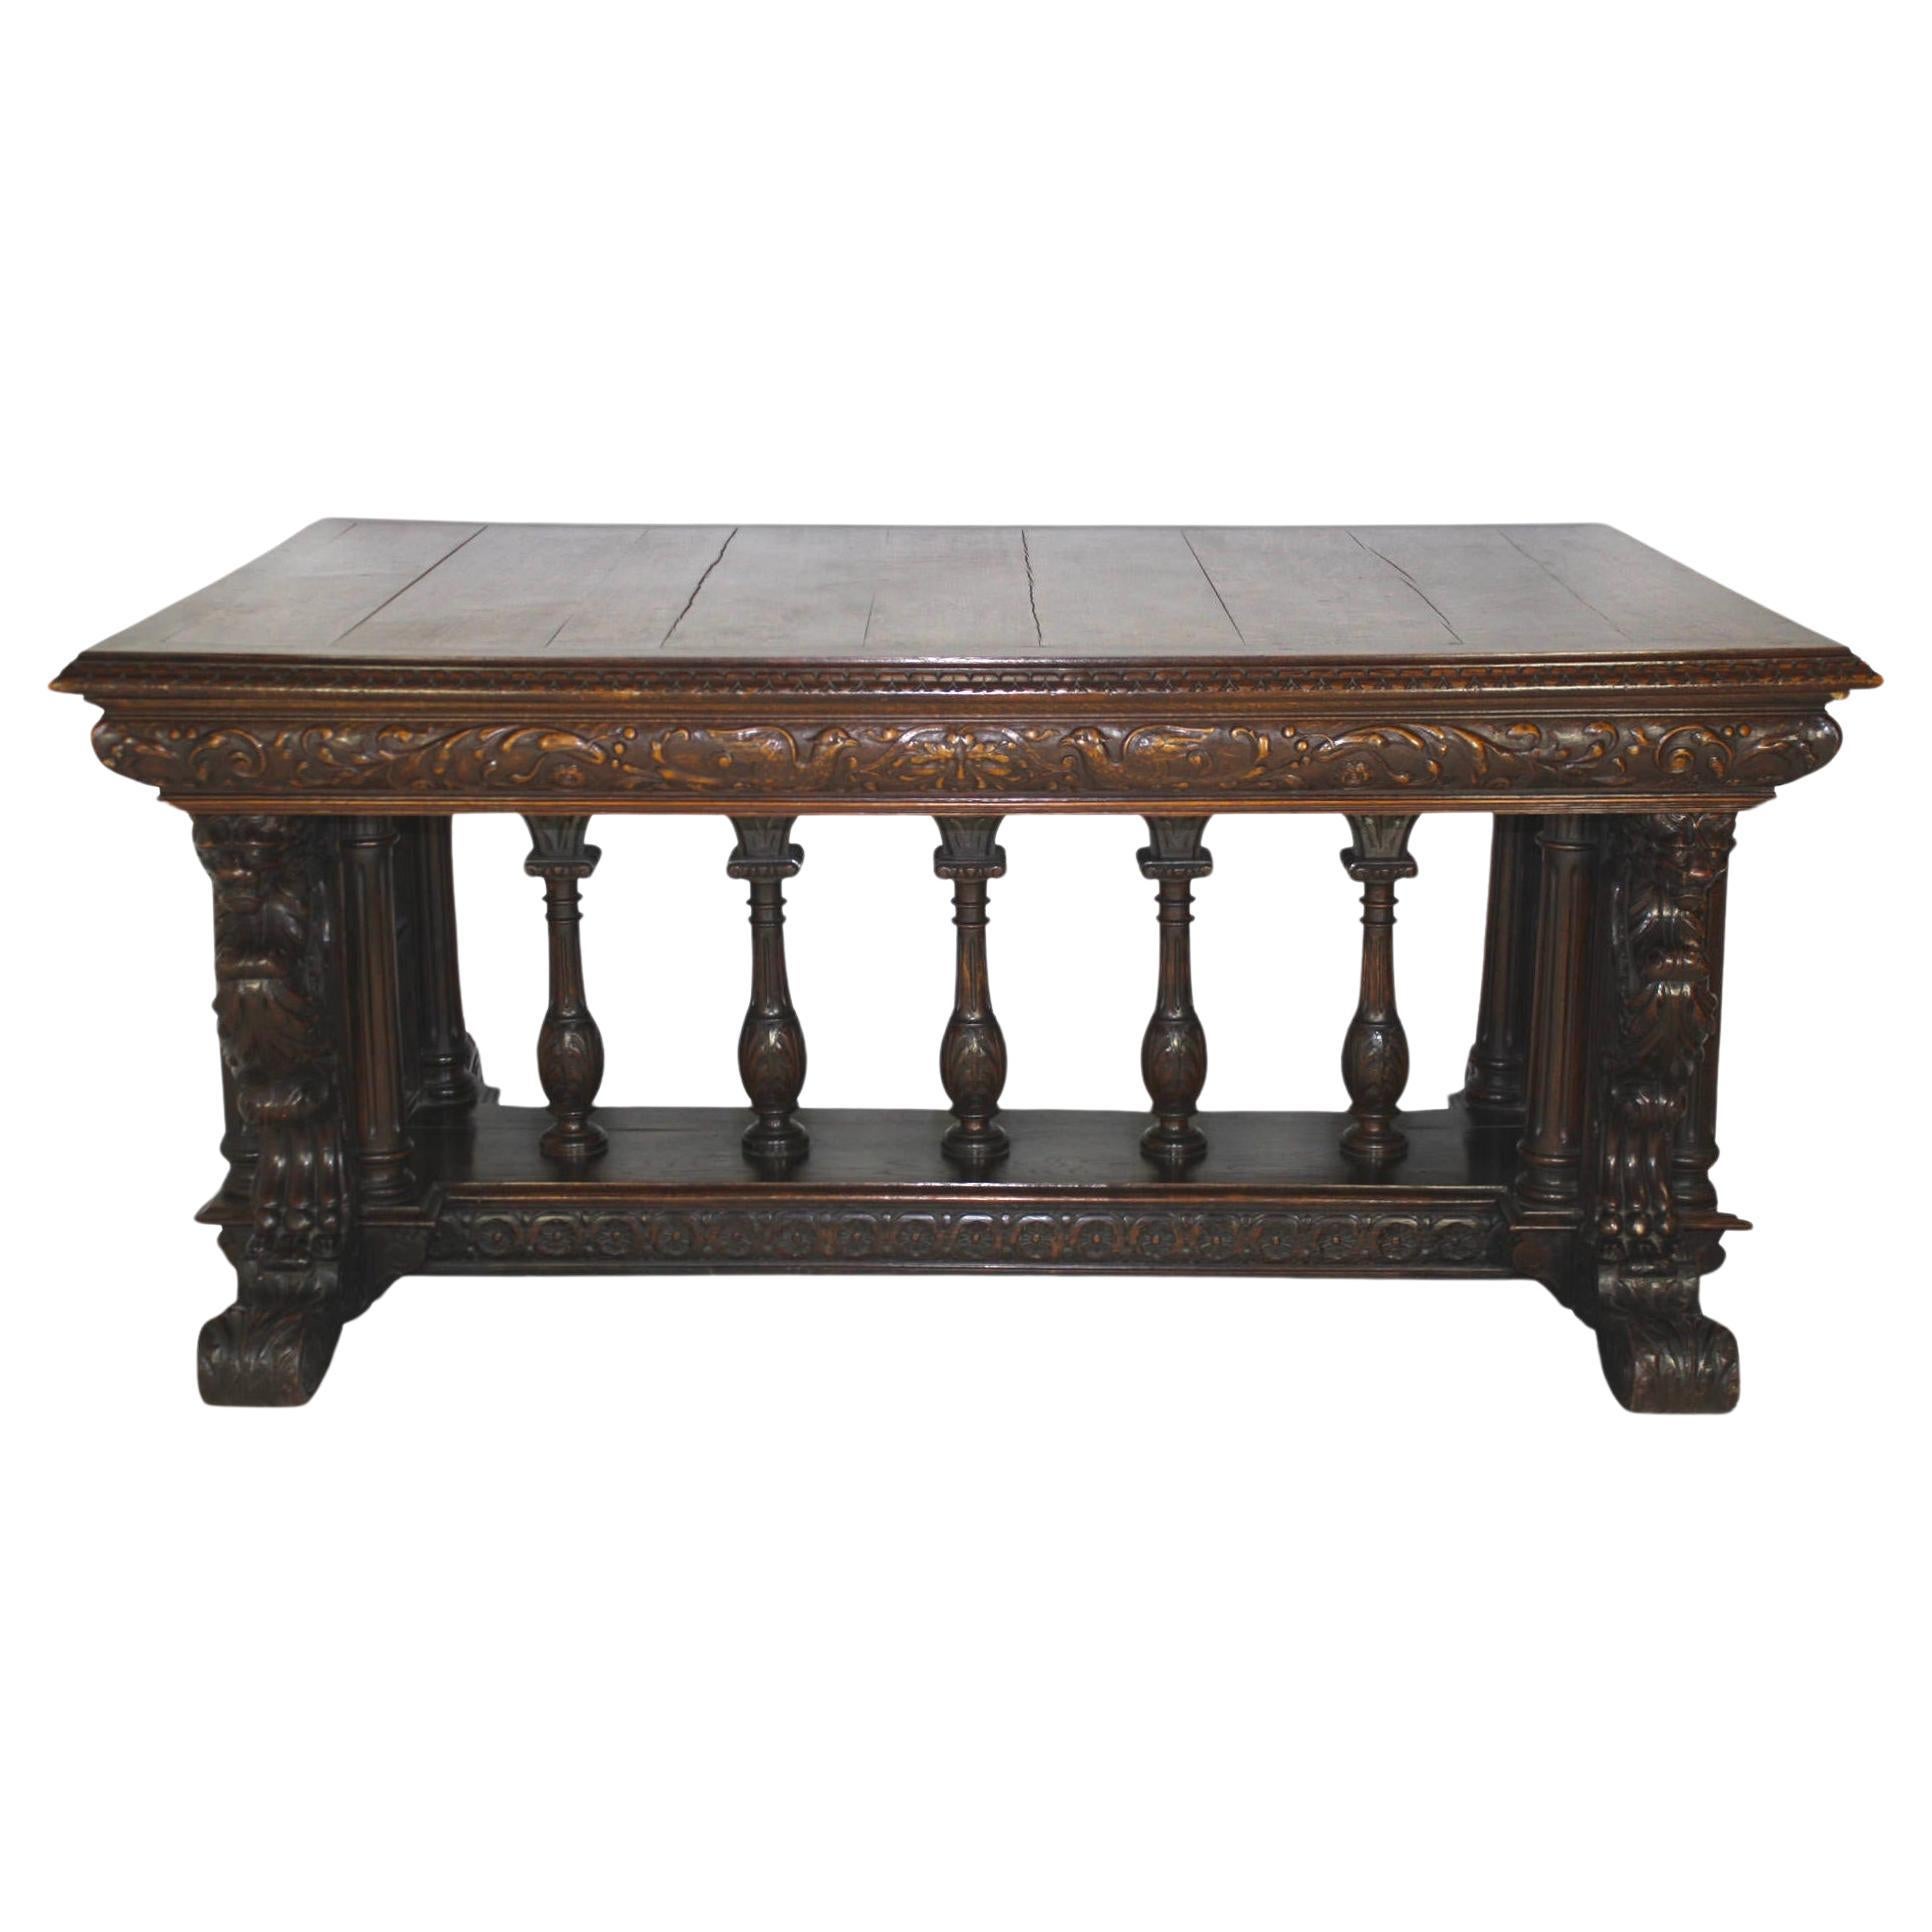 Created with excellent craftsmanship and solid construction in Europe during the late-19th century, this oak dining table is adorned with an array of extraordinary carvings. Four fierce, winged lions, which are carved with great detail on the